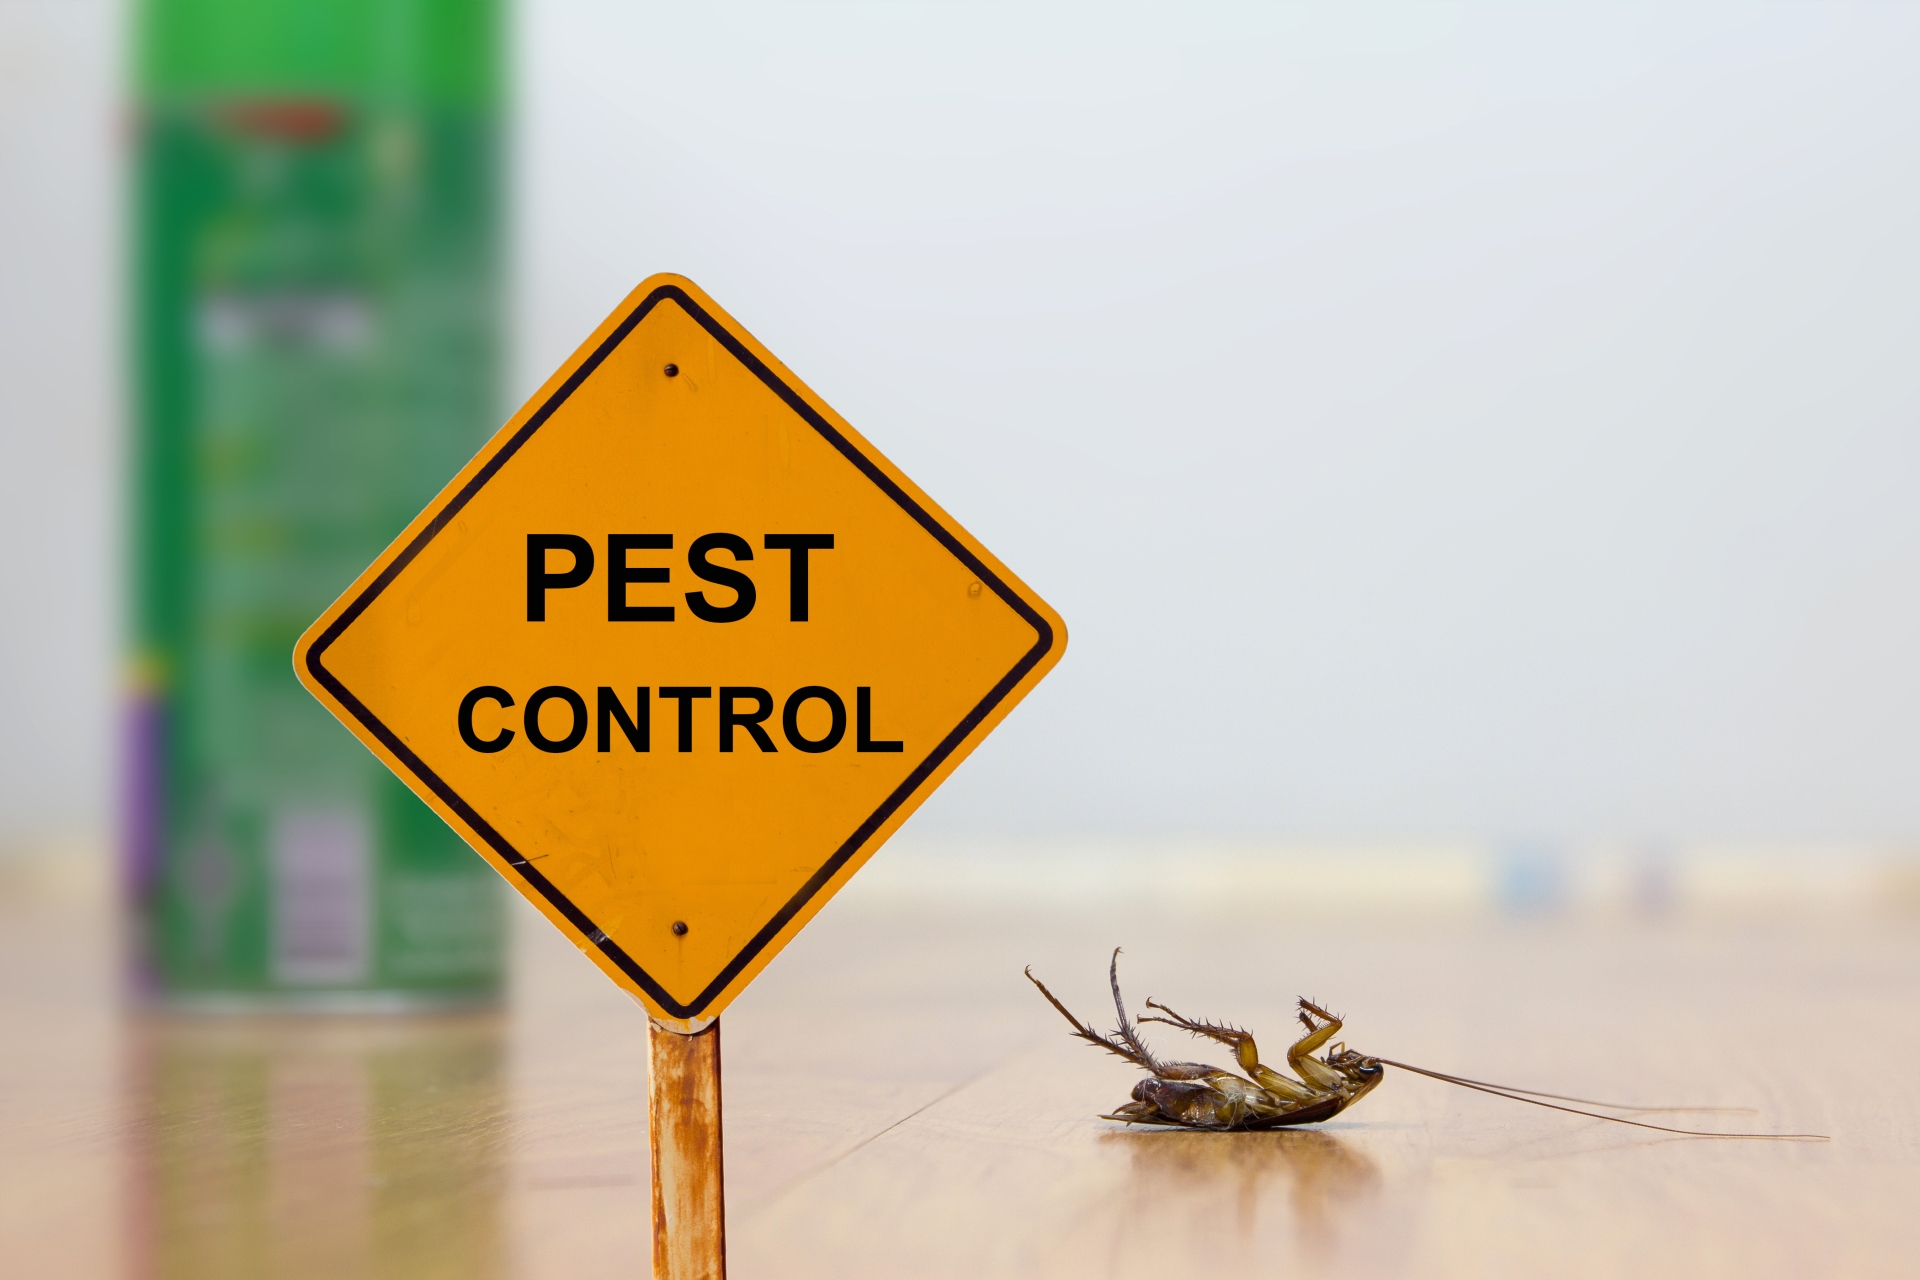 24 Hour Pest Control, Pest Control in Isleworth, TW7. Call Now 020 8166 9746